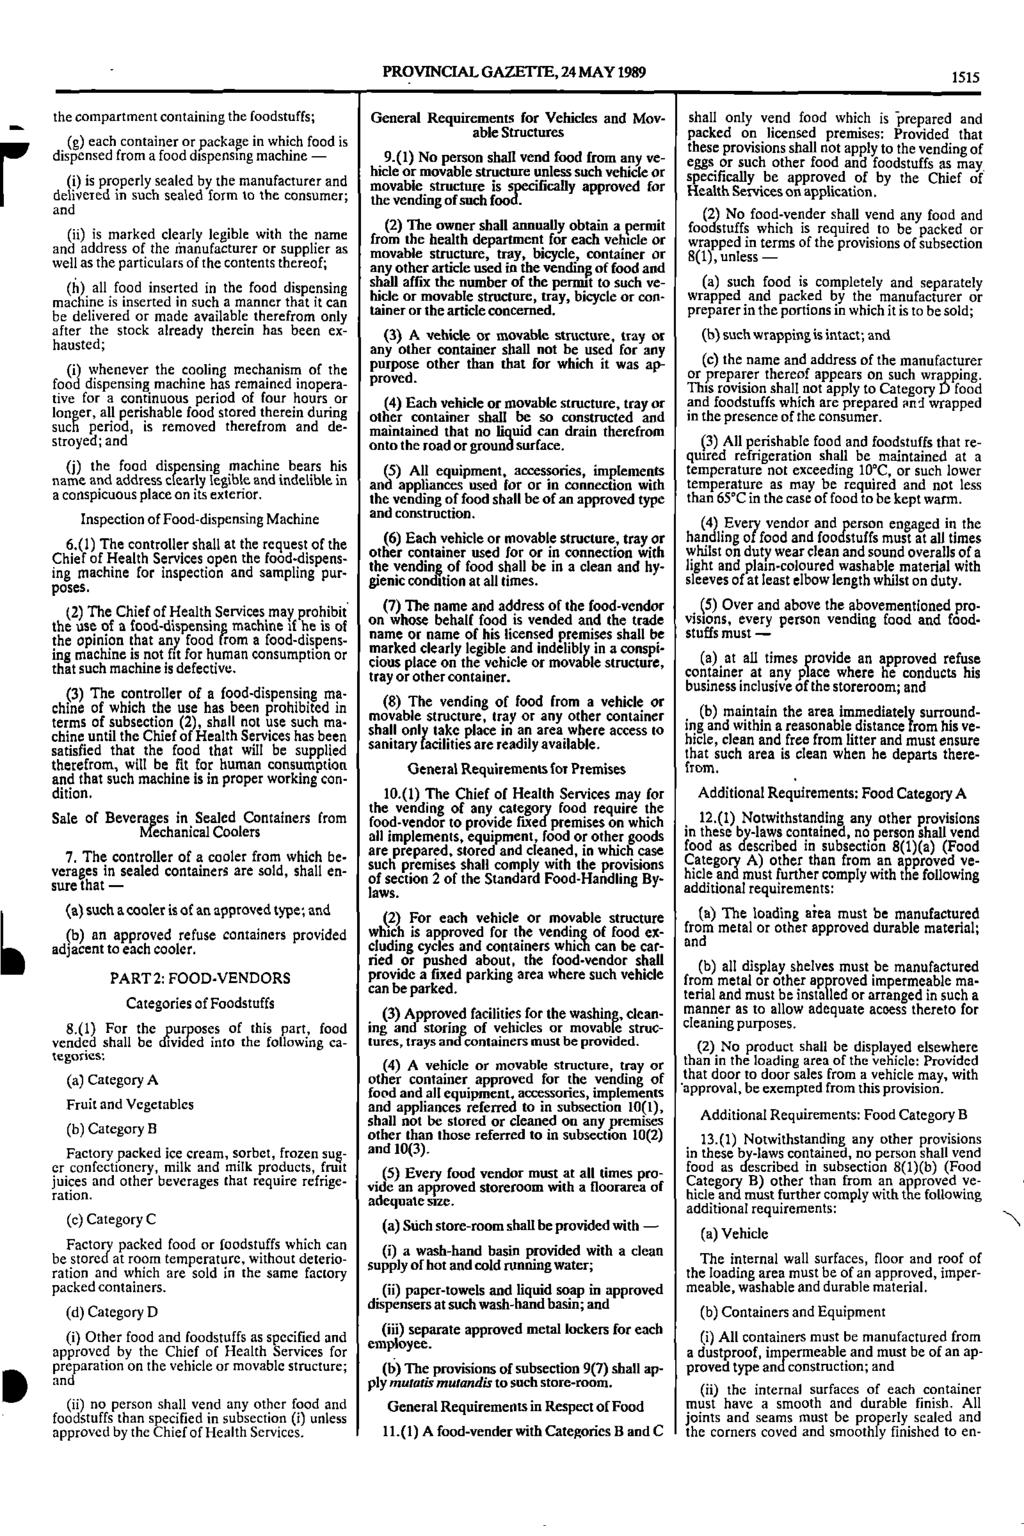 PROVINCIAL GAZETTE, 24 MAY 1989 1515 r (i) li the compartment containing the foodstuffs; General Requirements for Vehicles and Mov shall only vend food which is prepared and able Structures packed on